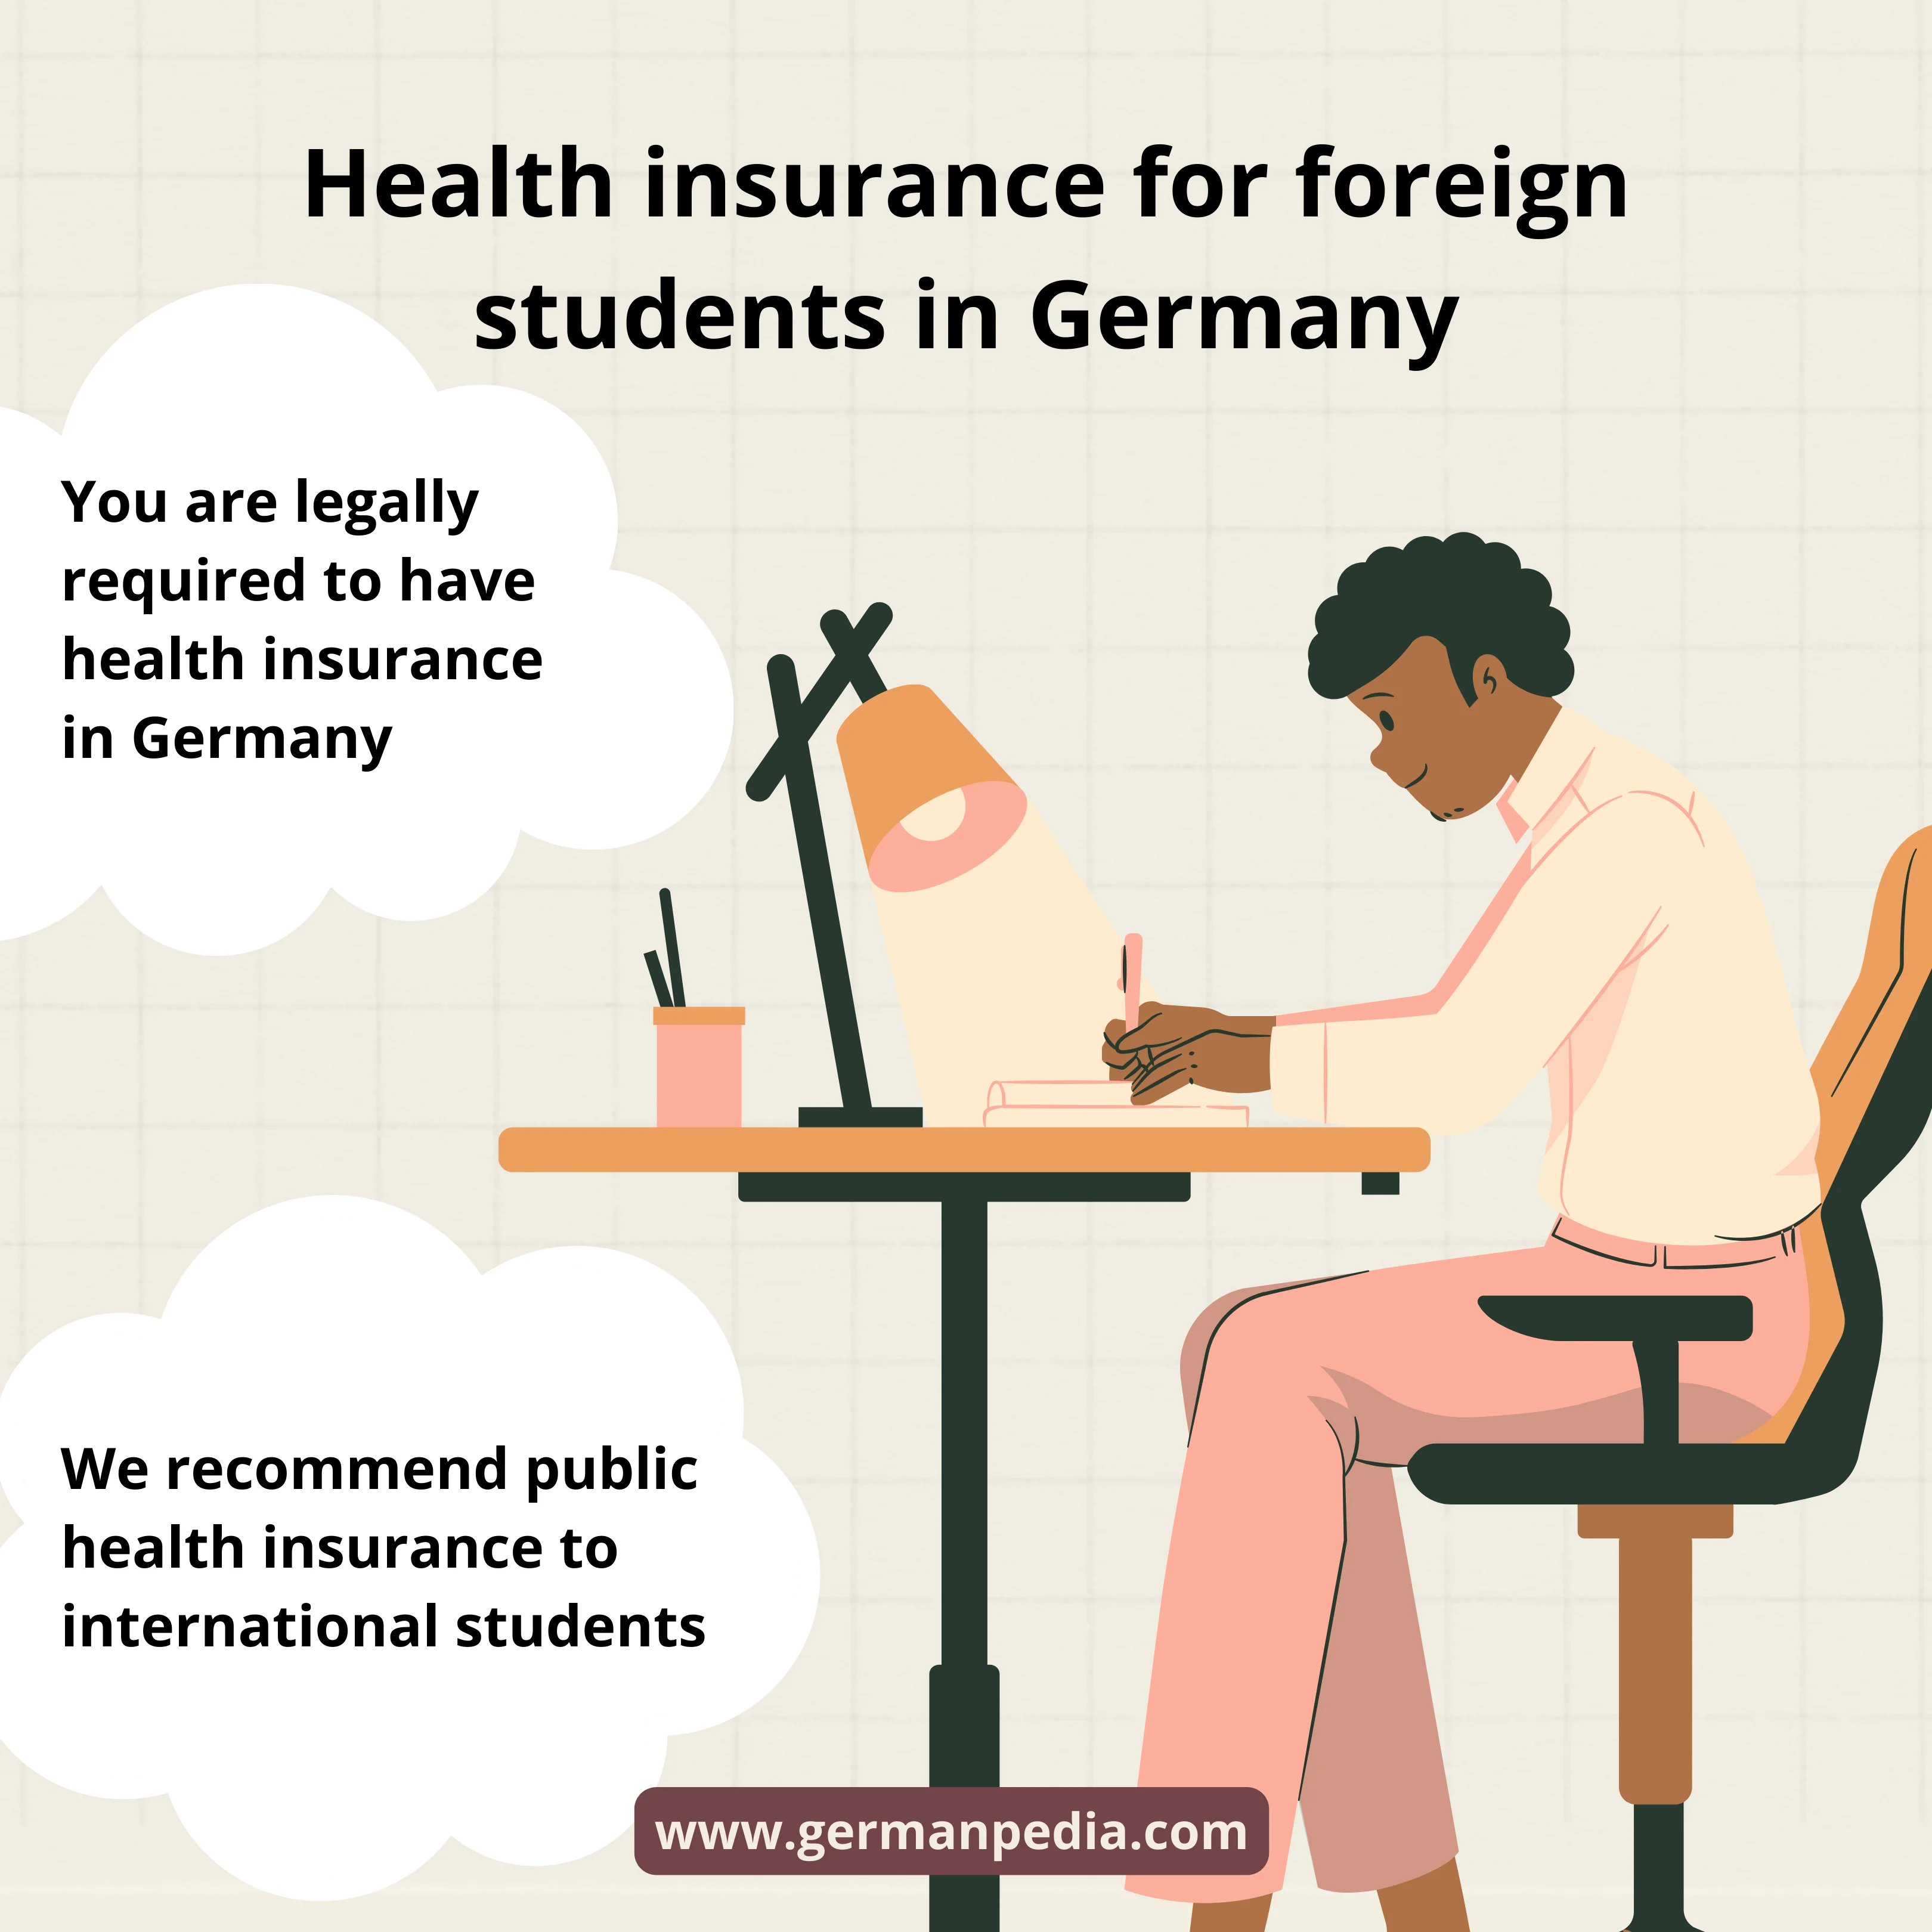 Health insurance for foreign students in Germany